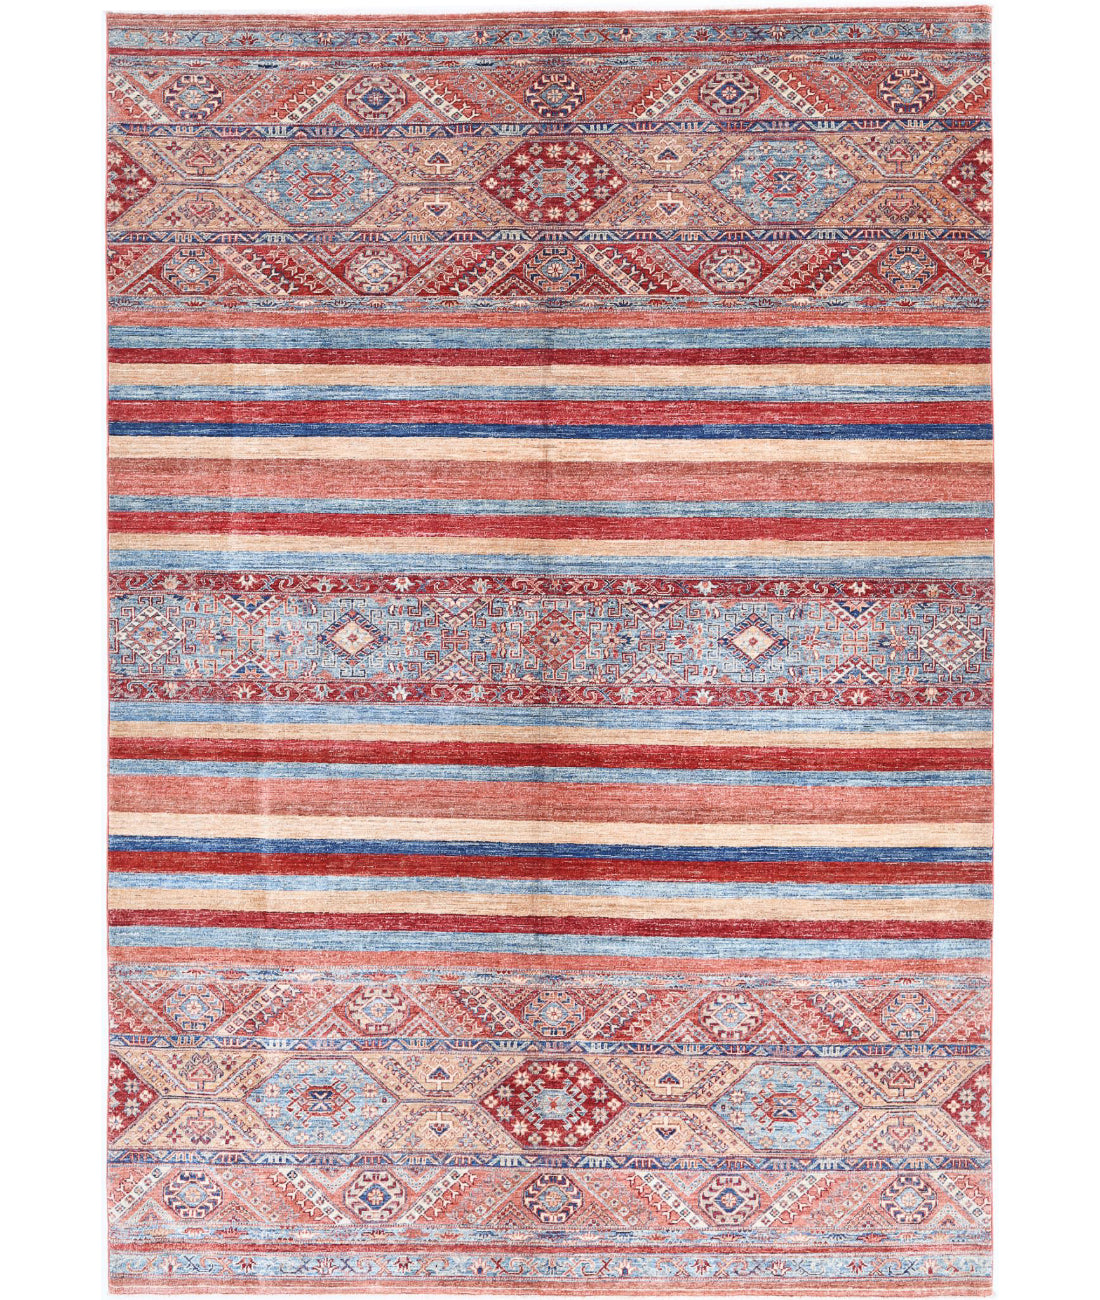 Hand Knotted Khurjeen Wool Rug - 6'7'' x 9'8'' 6'7'' x 9'8'' (198 X 290) / Multi / Multi